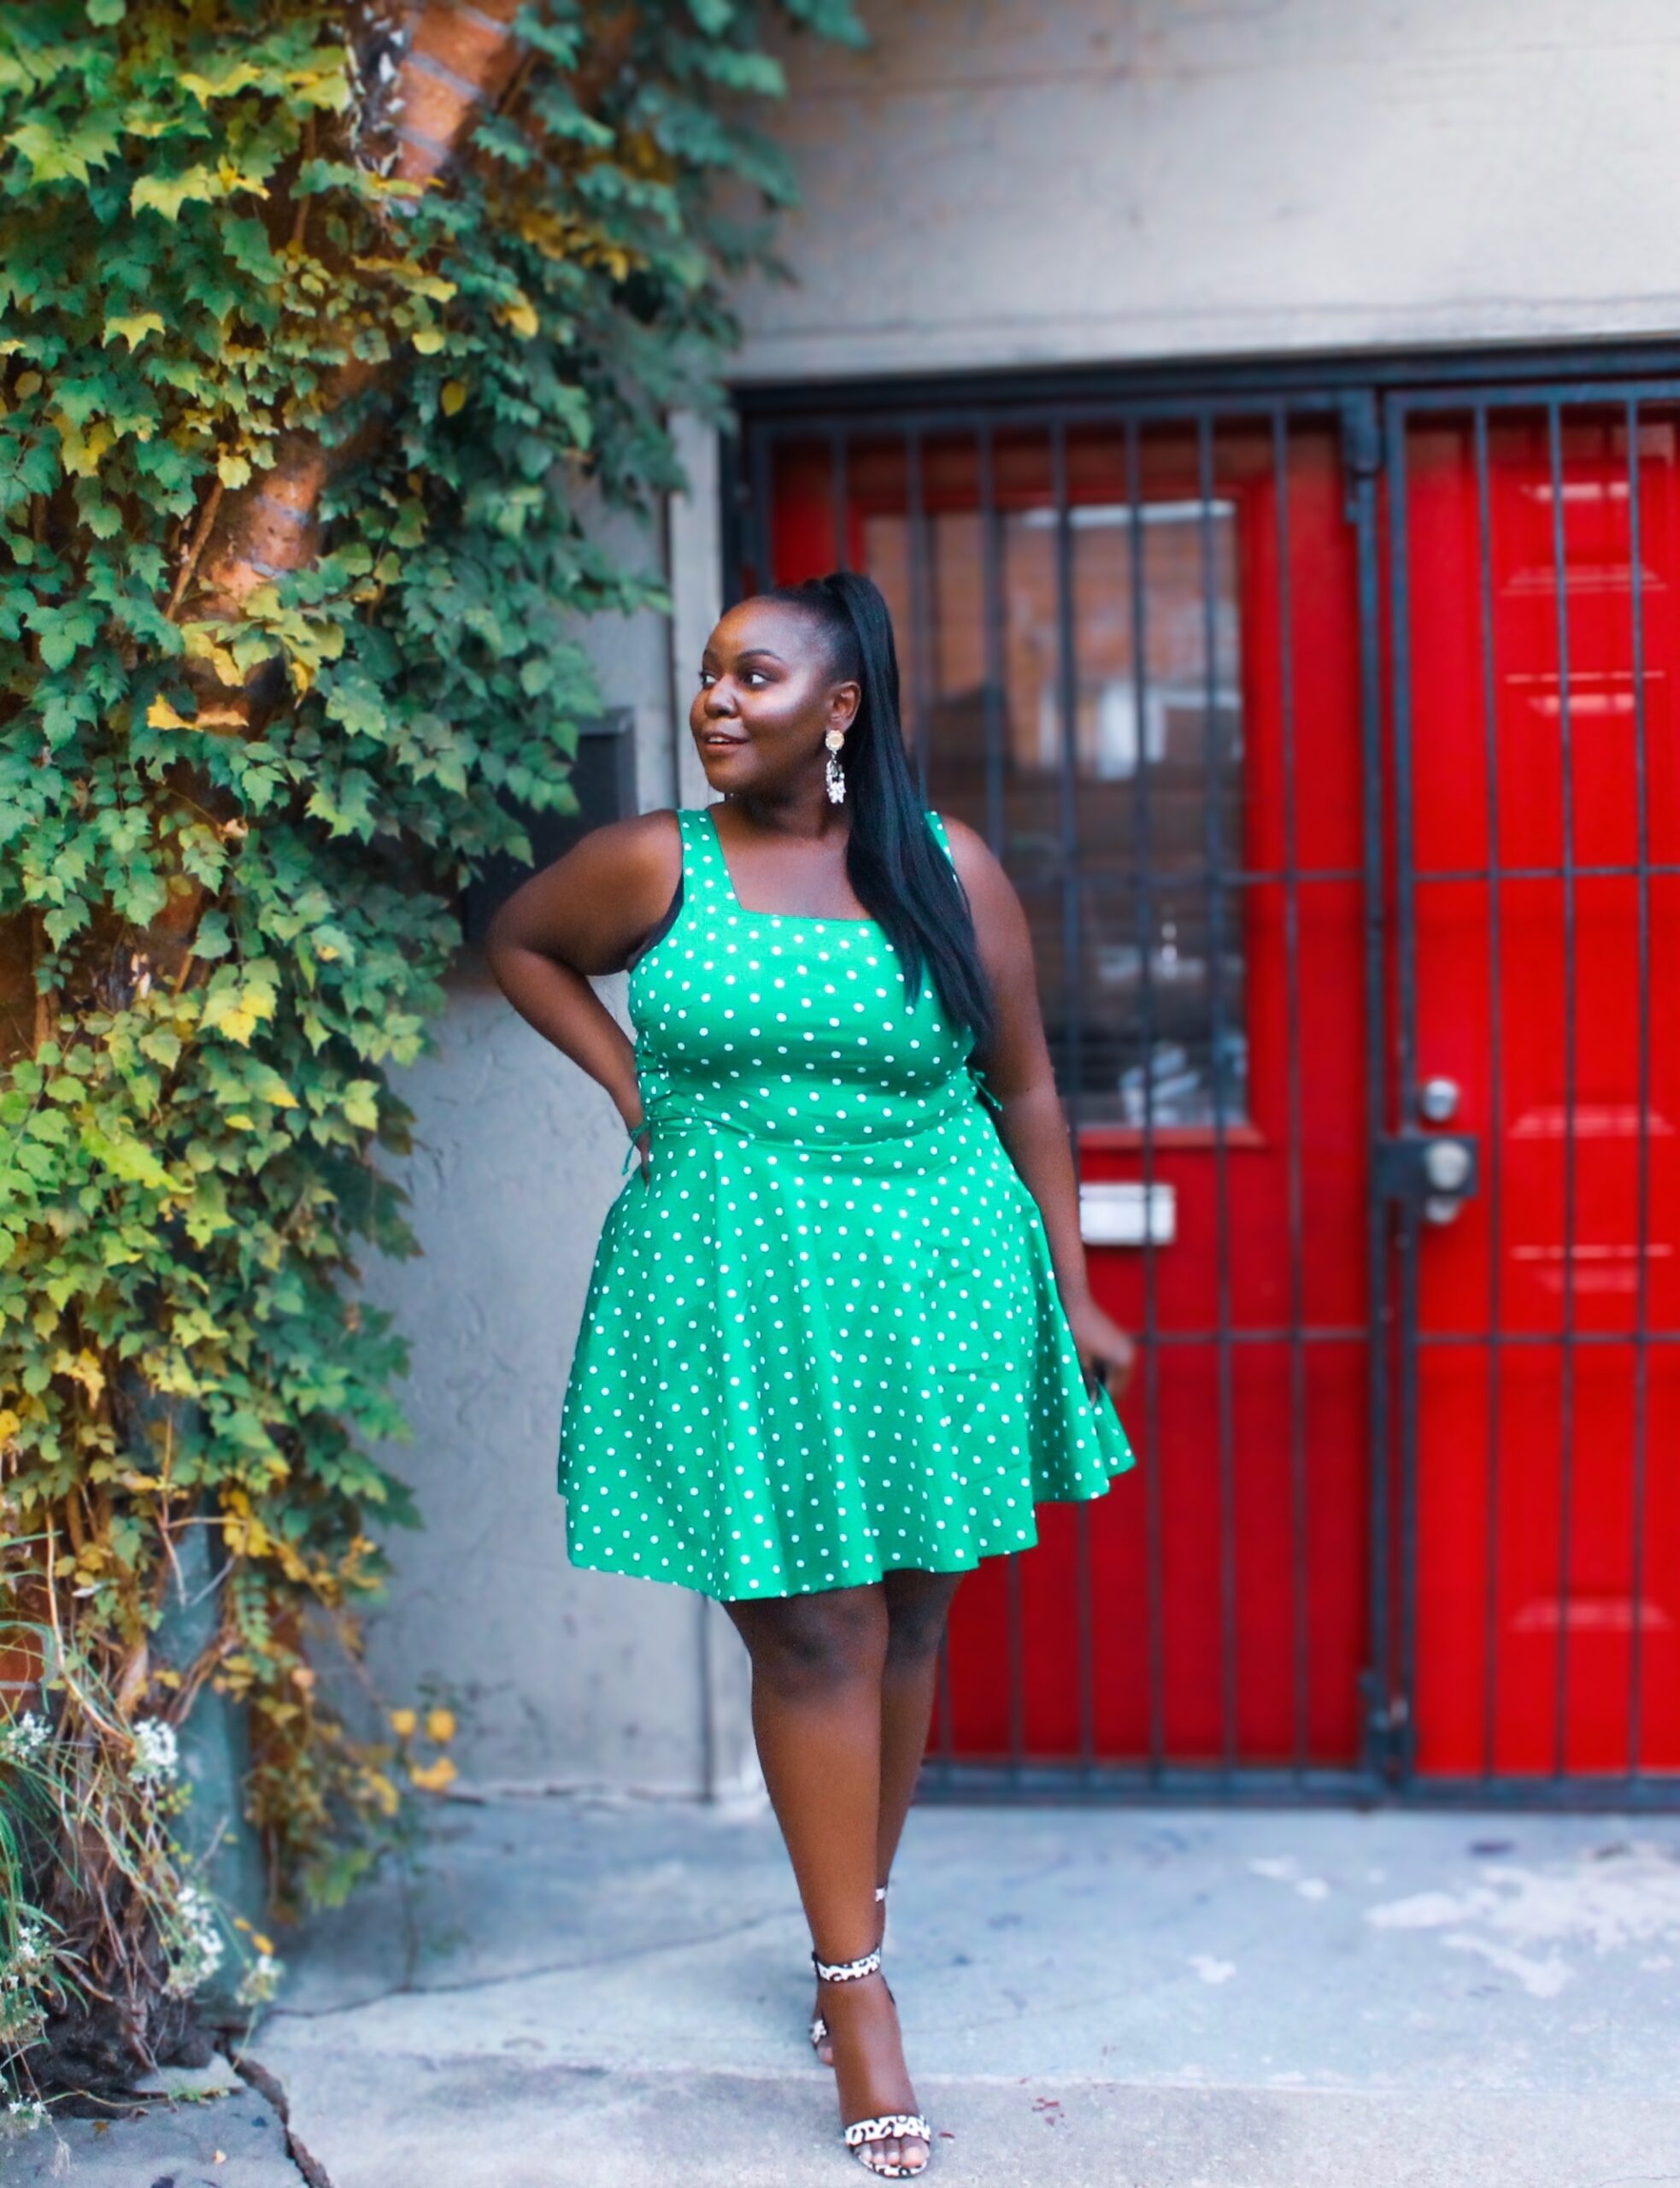 lifestyle blogger, texas houston influencer, affordable, classy, fabulous, friends, parents, black girl, dark skin, holiday outfit ideas, inspiration, trendy, chic, stylish, fashionable, blogger millennial Friendly holiday gift guide, wellness, style blogger